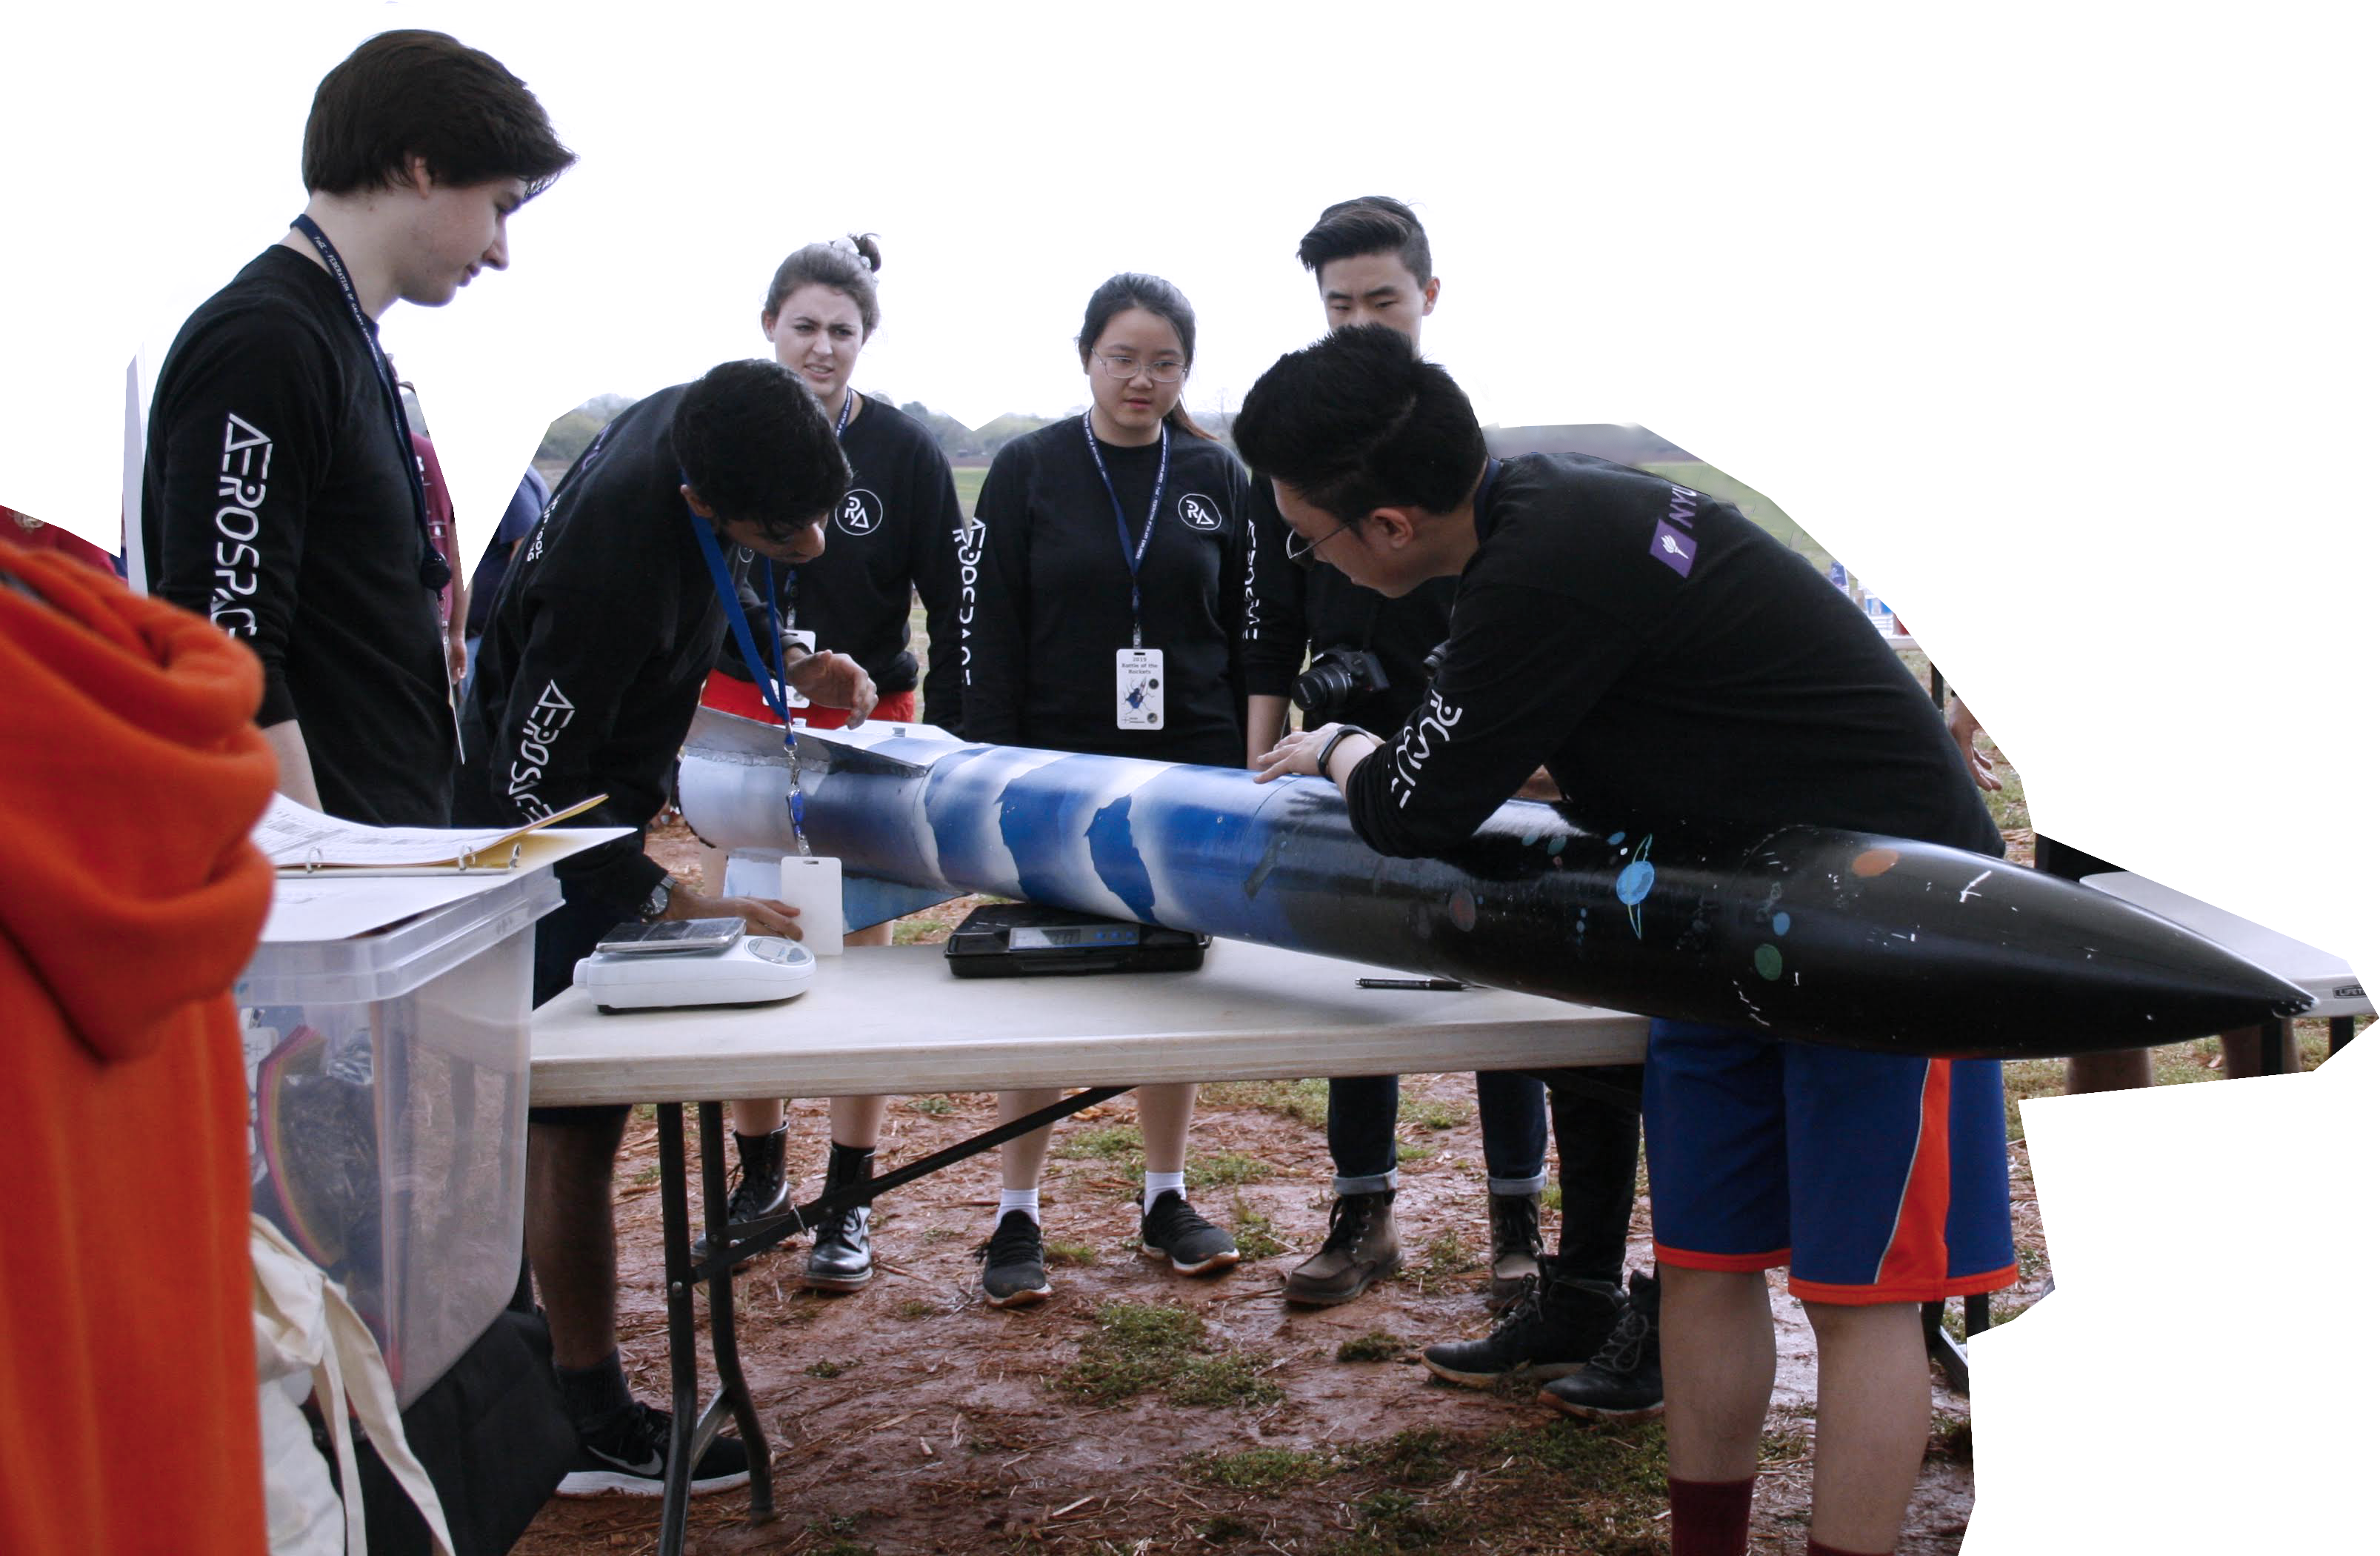 Rogue Aerospace Members during Rocket Assemby at the Battle of The Rockets